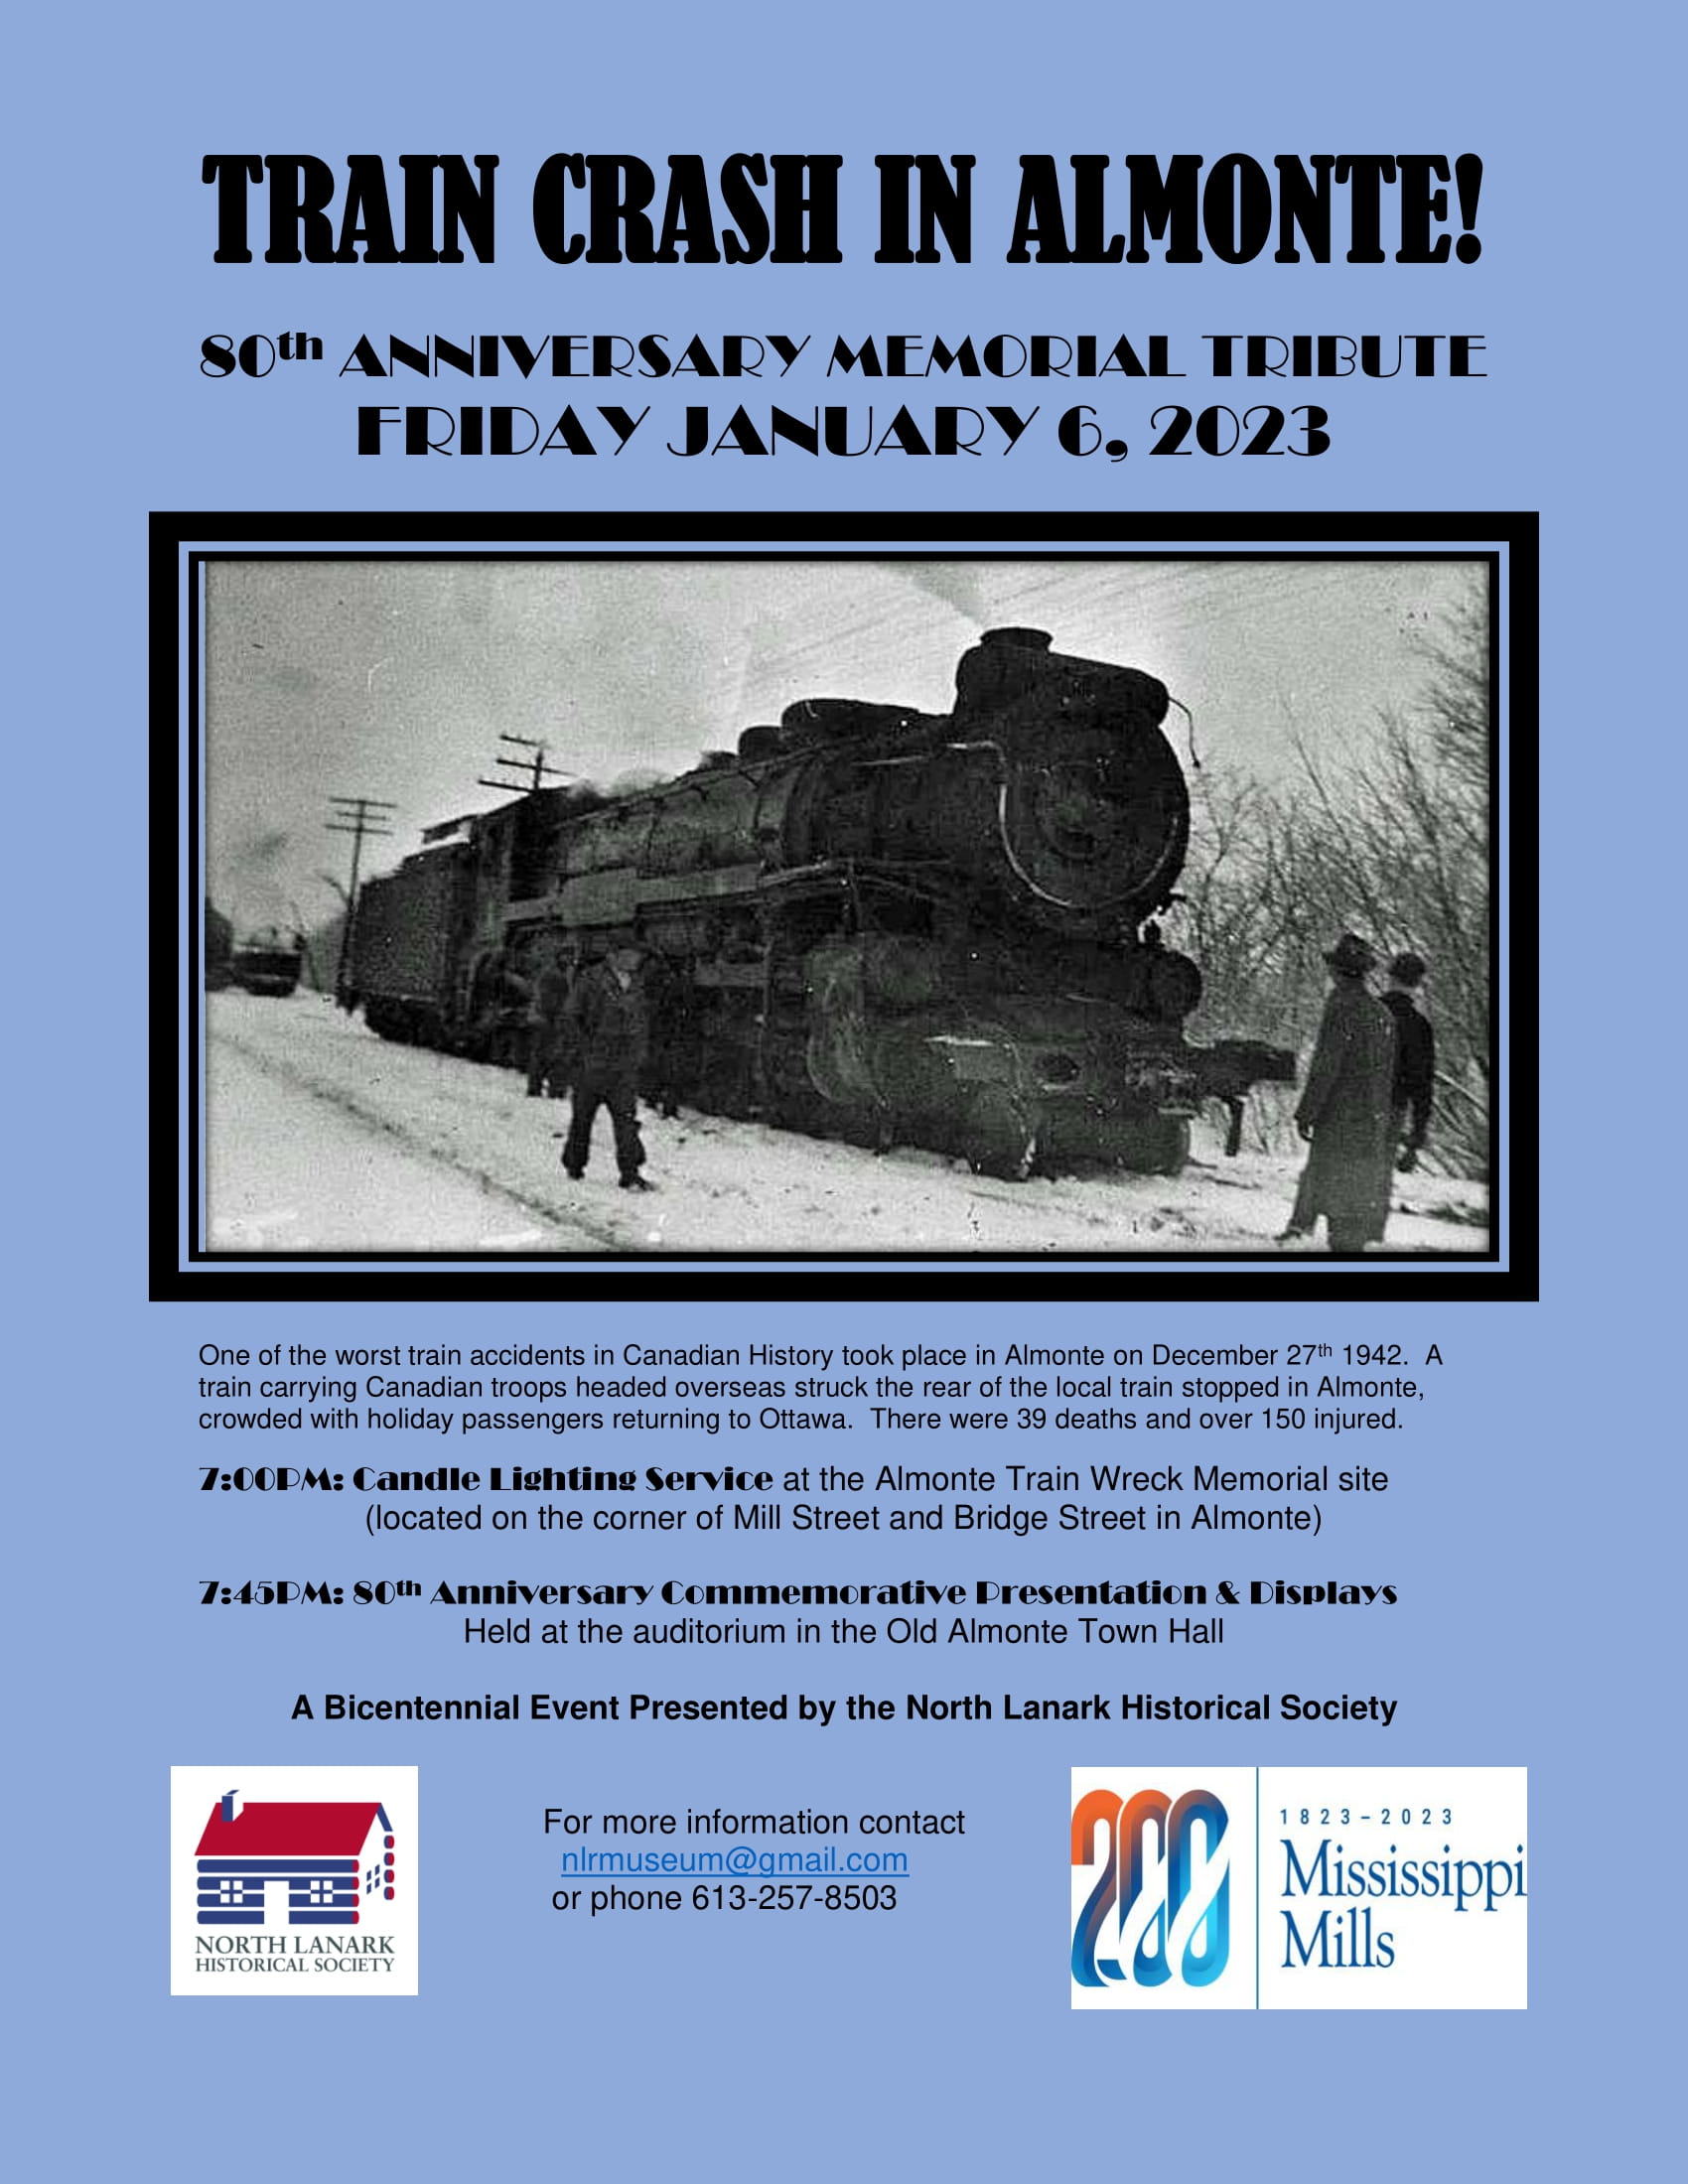 Poster for the Almonte Train Wreck memorial tribute on Friday, January 6, 2023